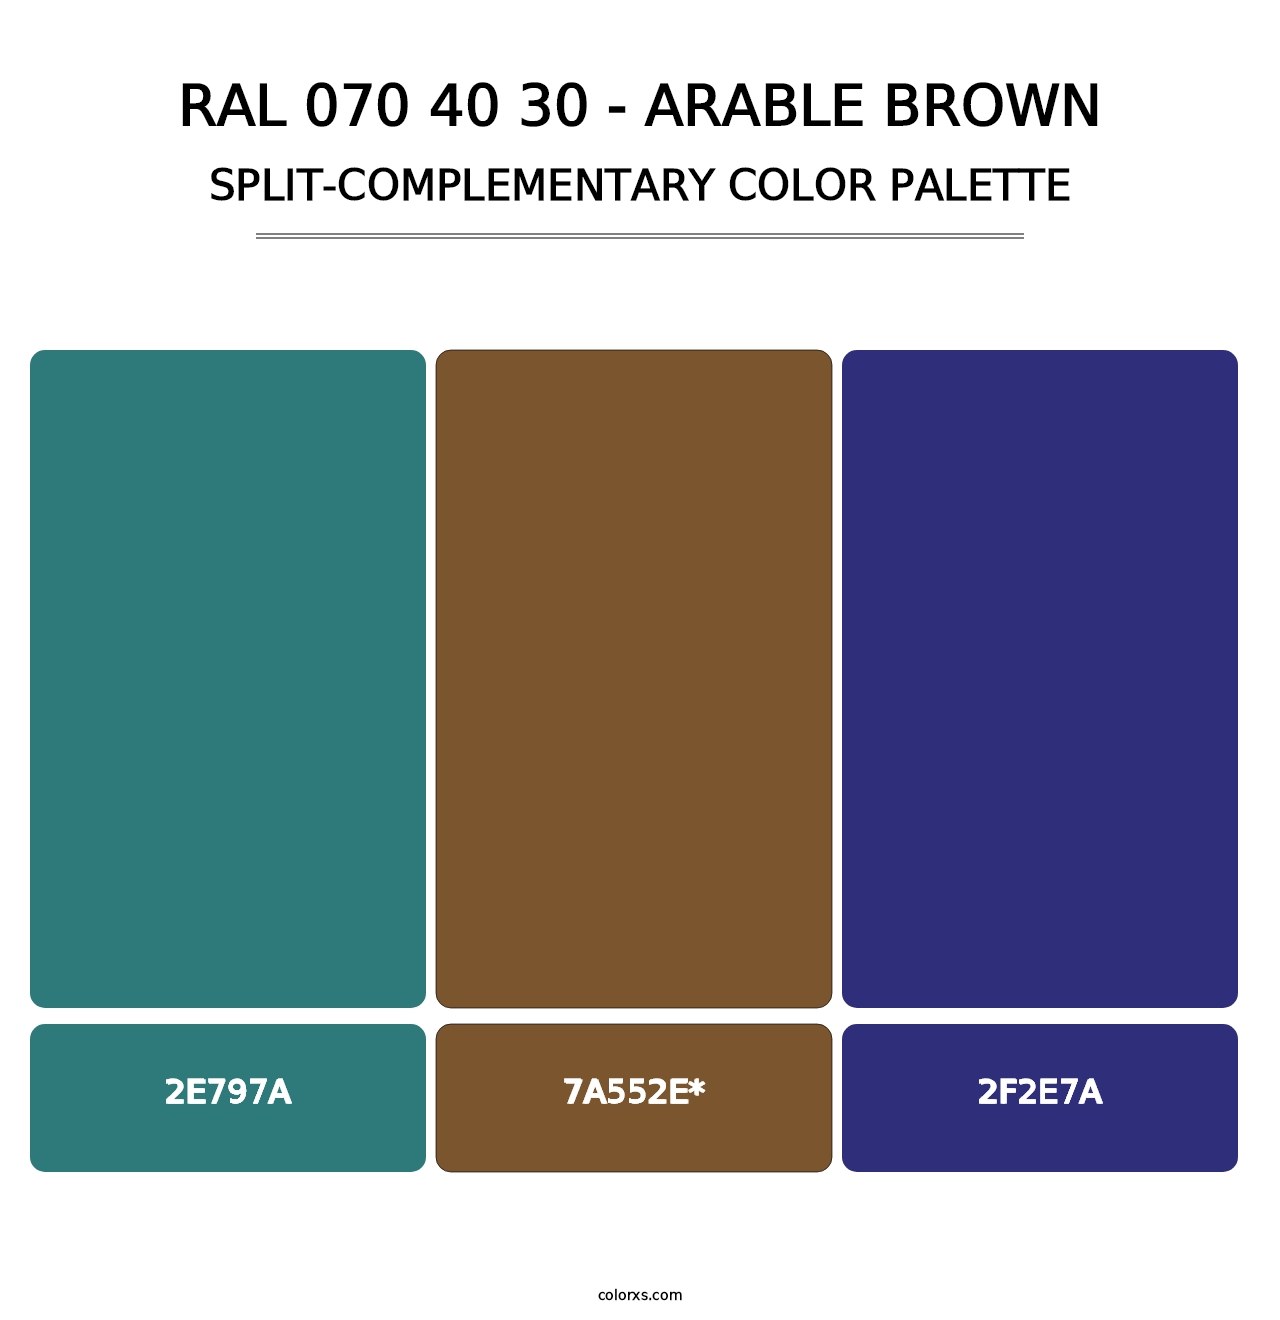 RAL 070 40 30 - Arable Brown - Split-Complementary Color Palette